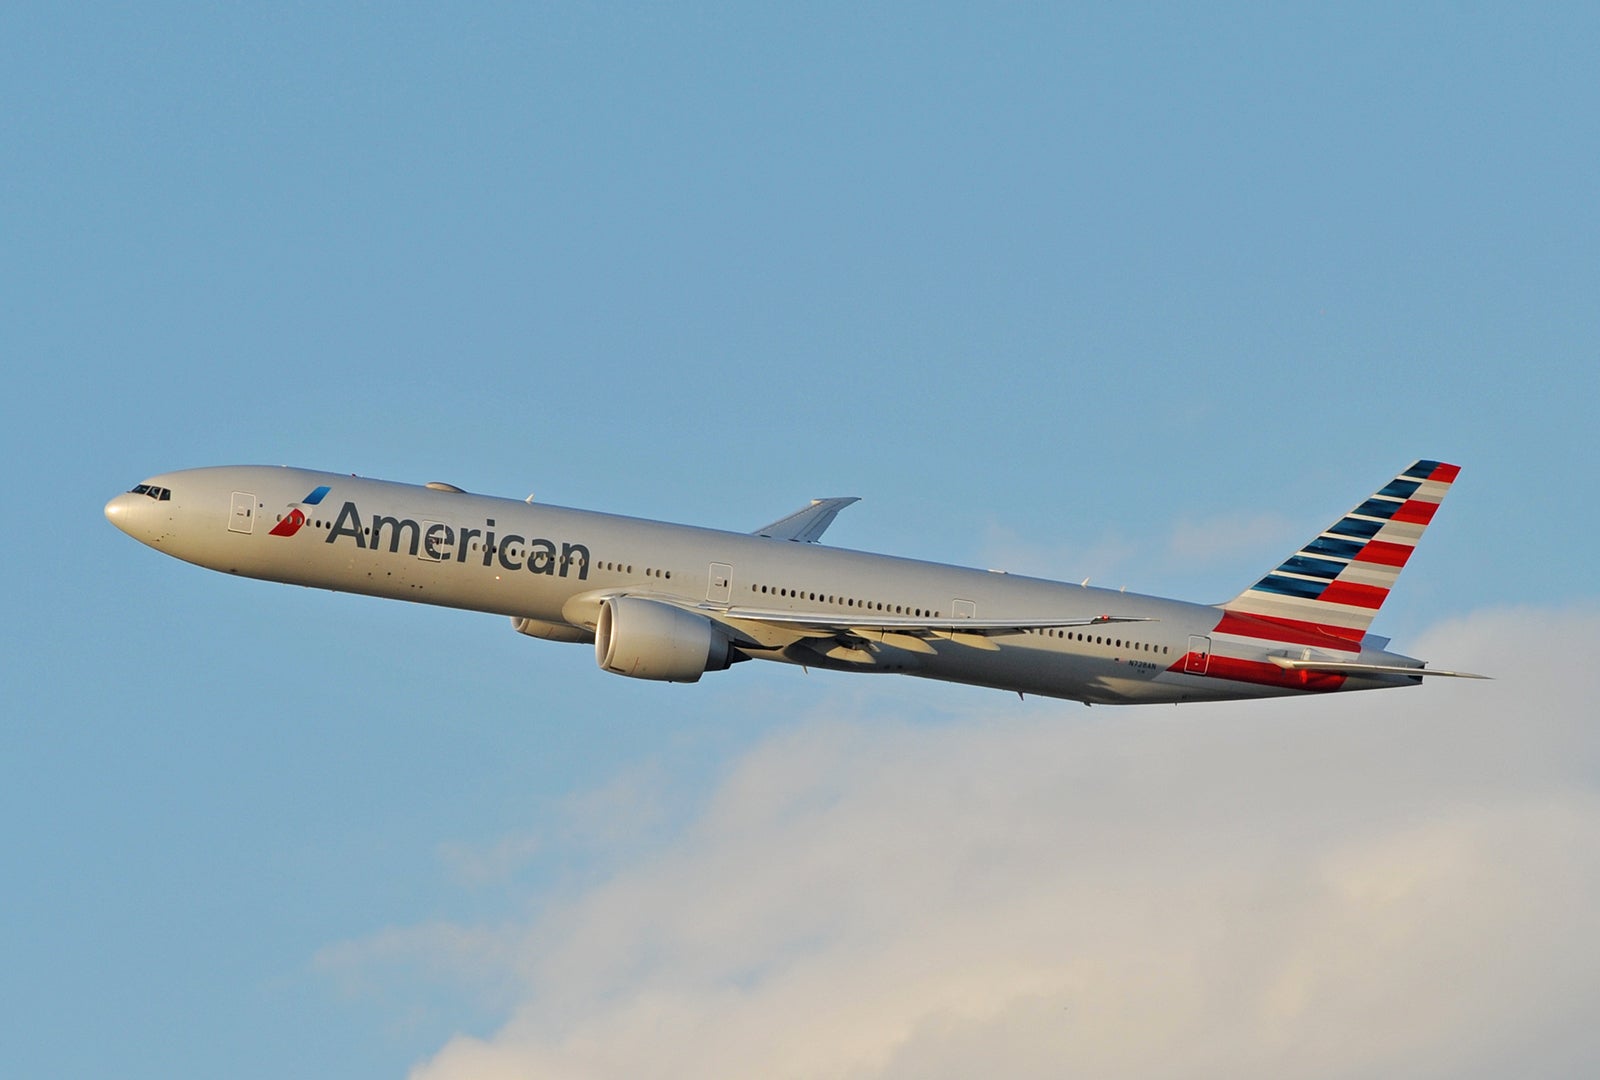 American Airlines B777-300ER